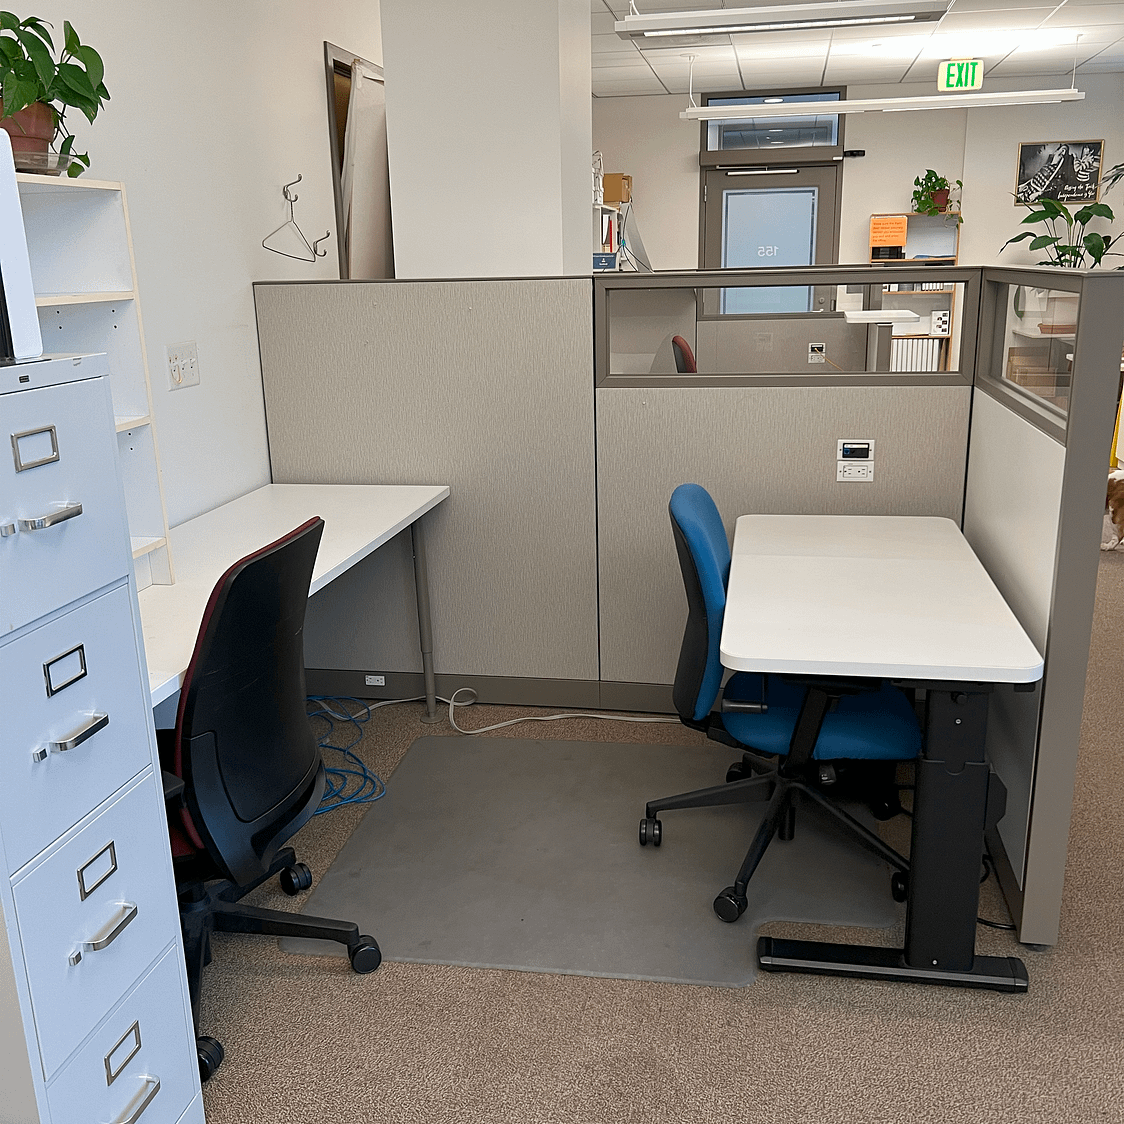 Middle cubicle with two desks and two chairs, a small bookshelf, and a full sized filing cabinet